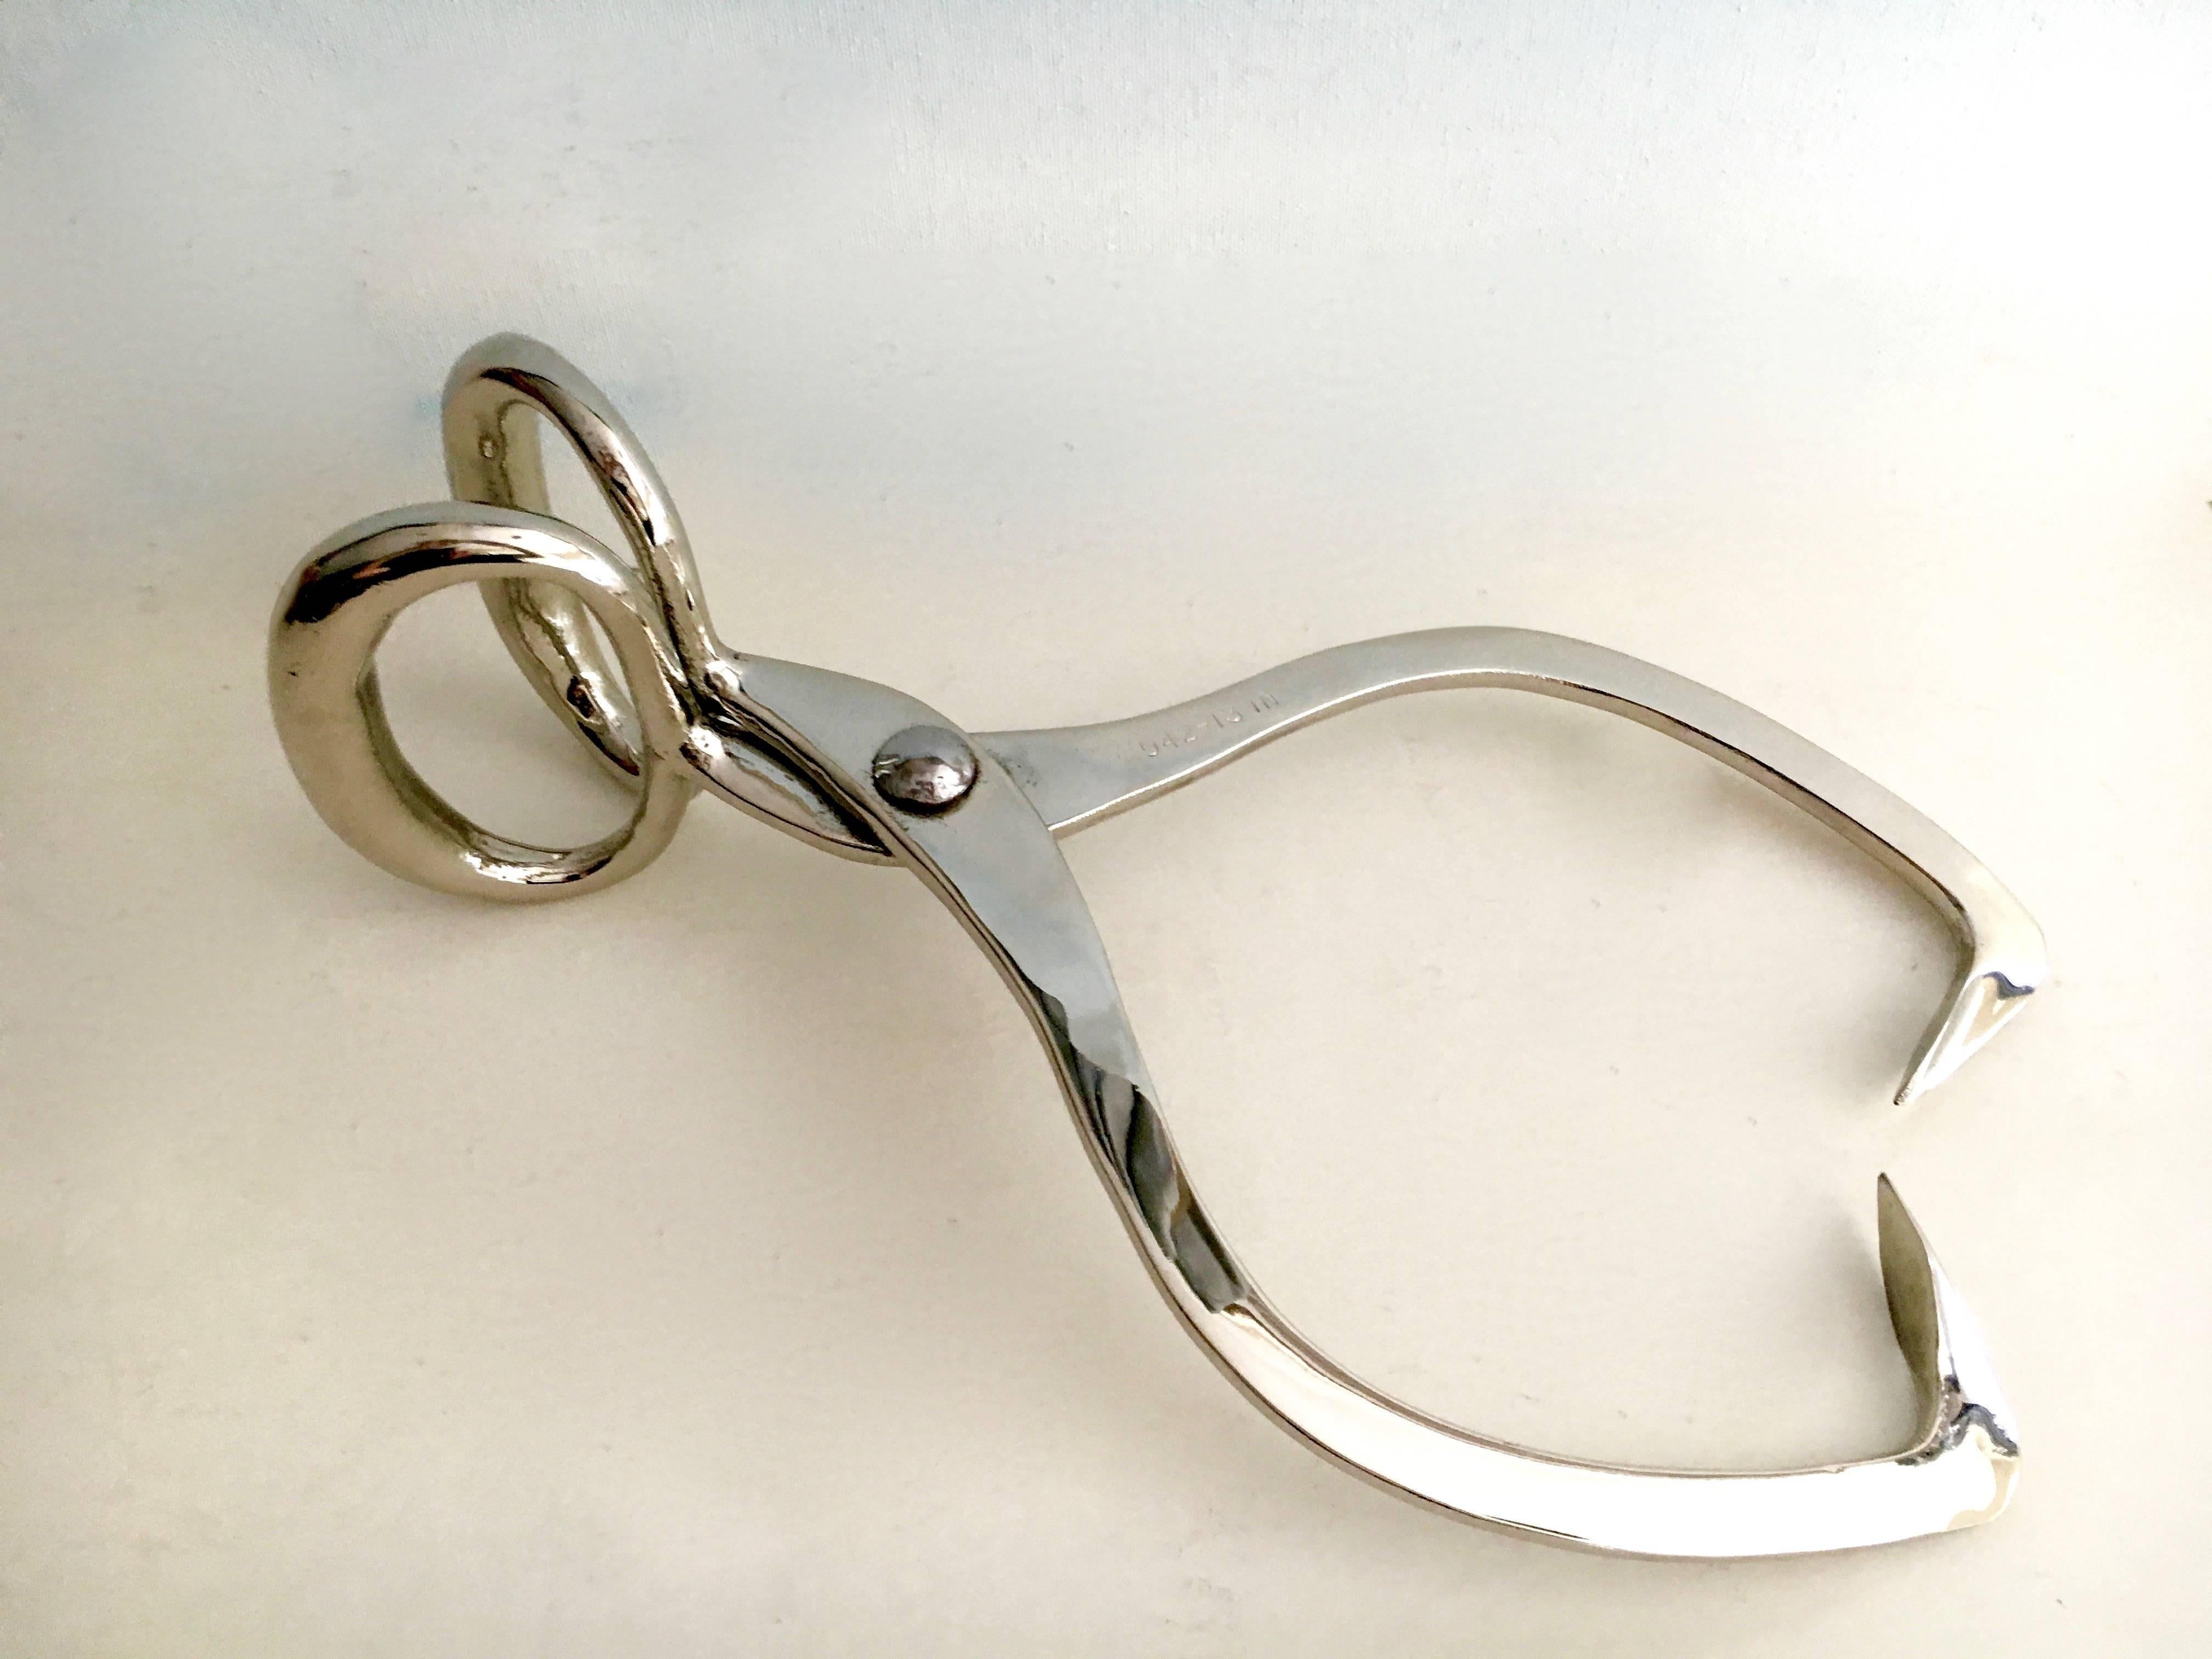 Silver plate ice tongs hay hooks, when you move your ice or pick up the hay. Be the chicest with your block!

This pair of Ice / hay tongs are a great decorative item or can be used as a paper weight.

